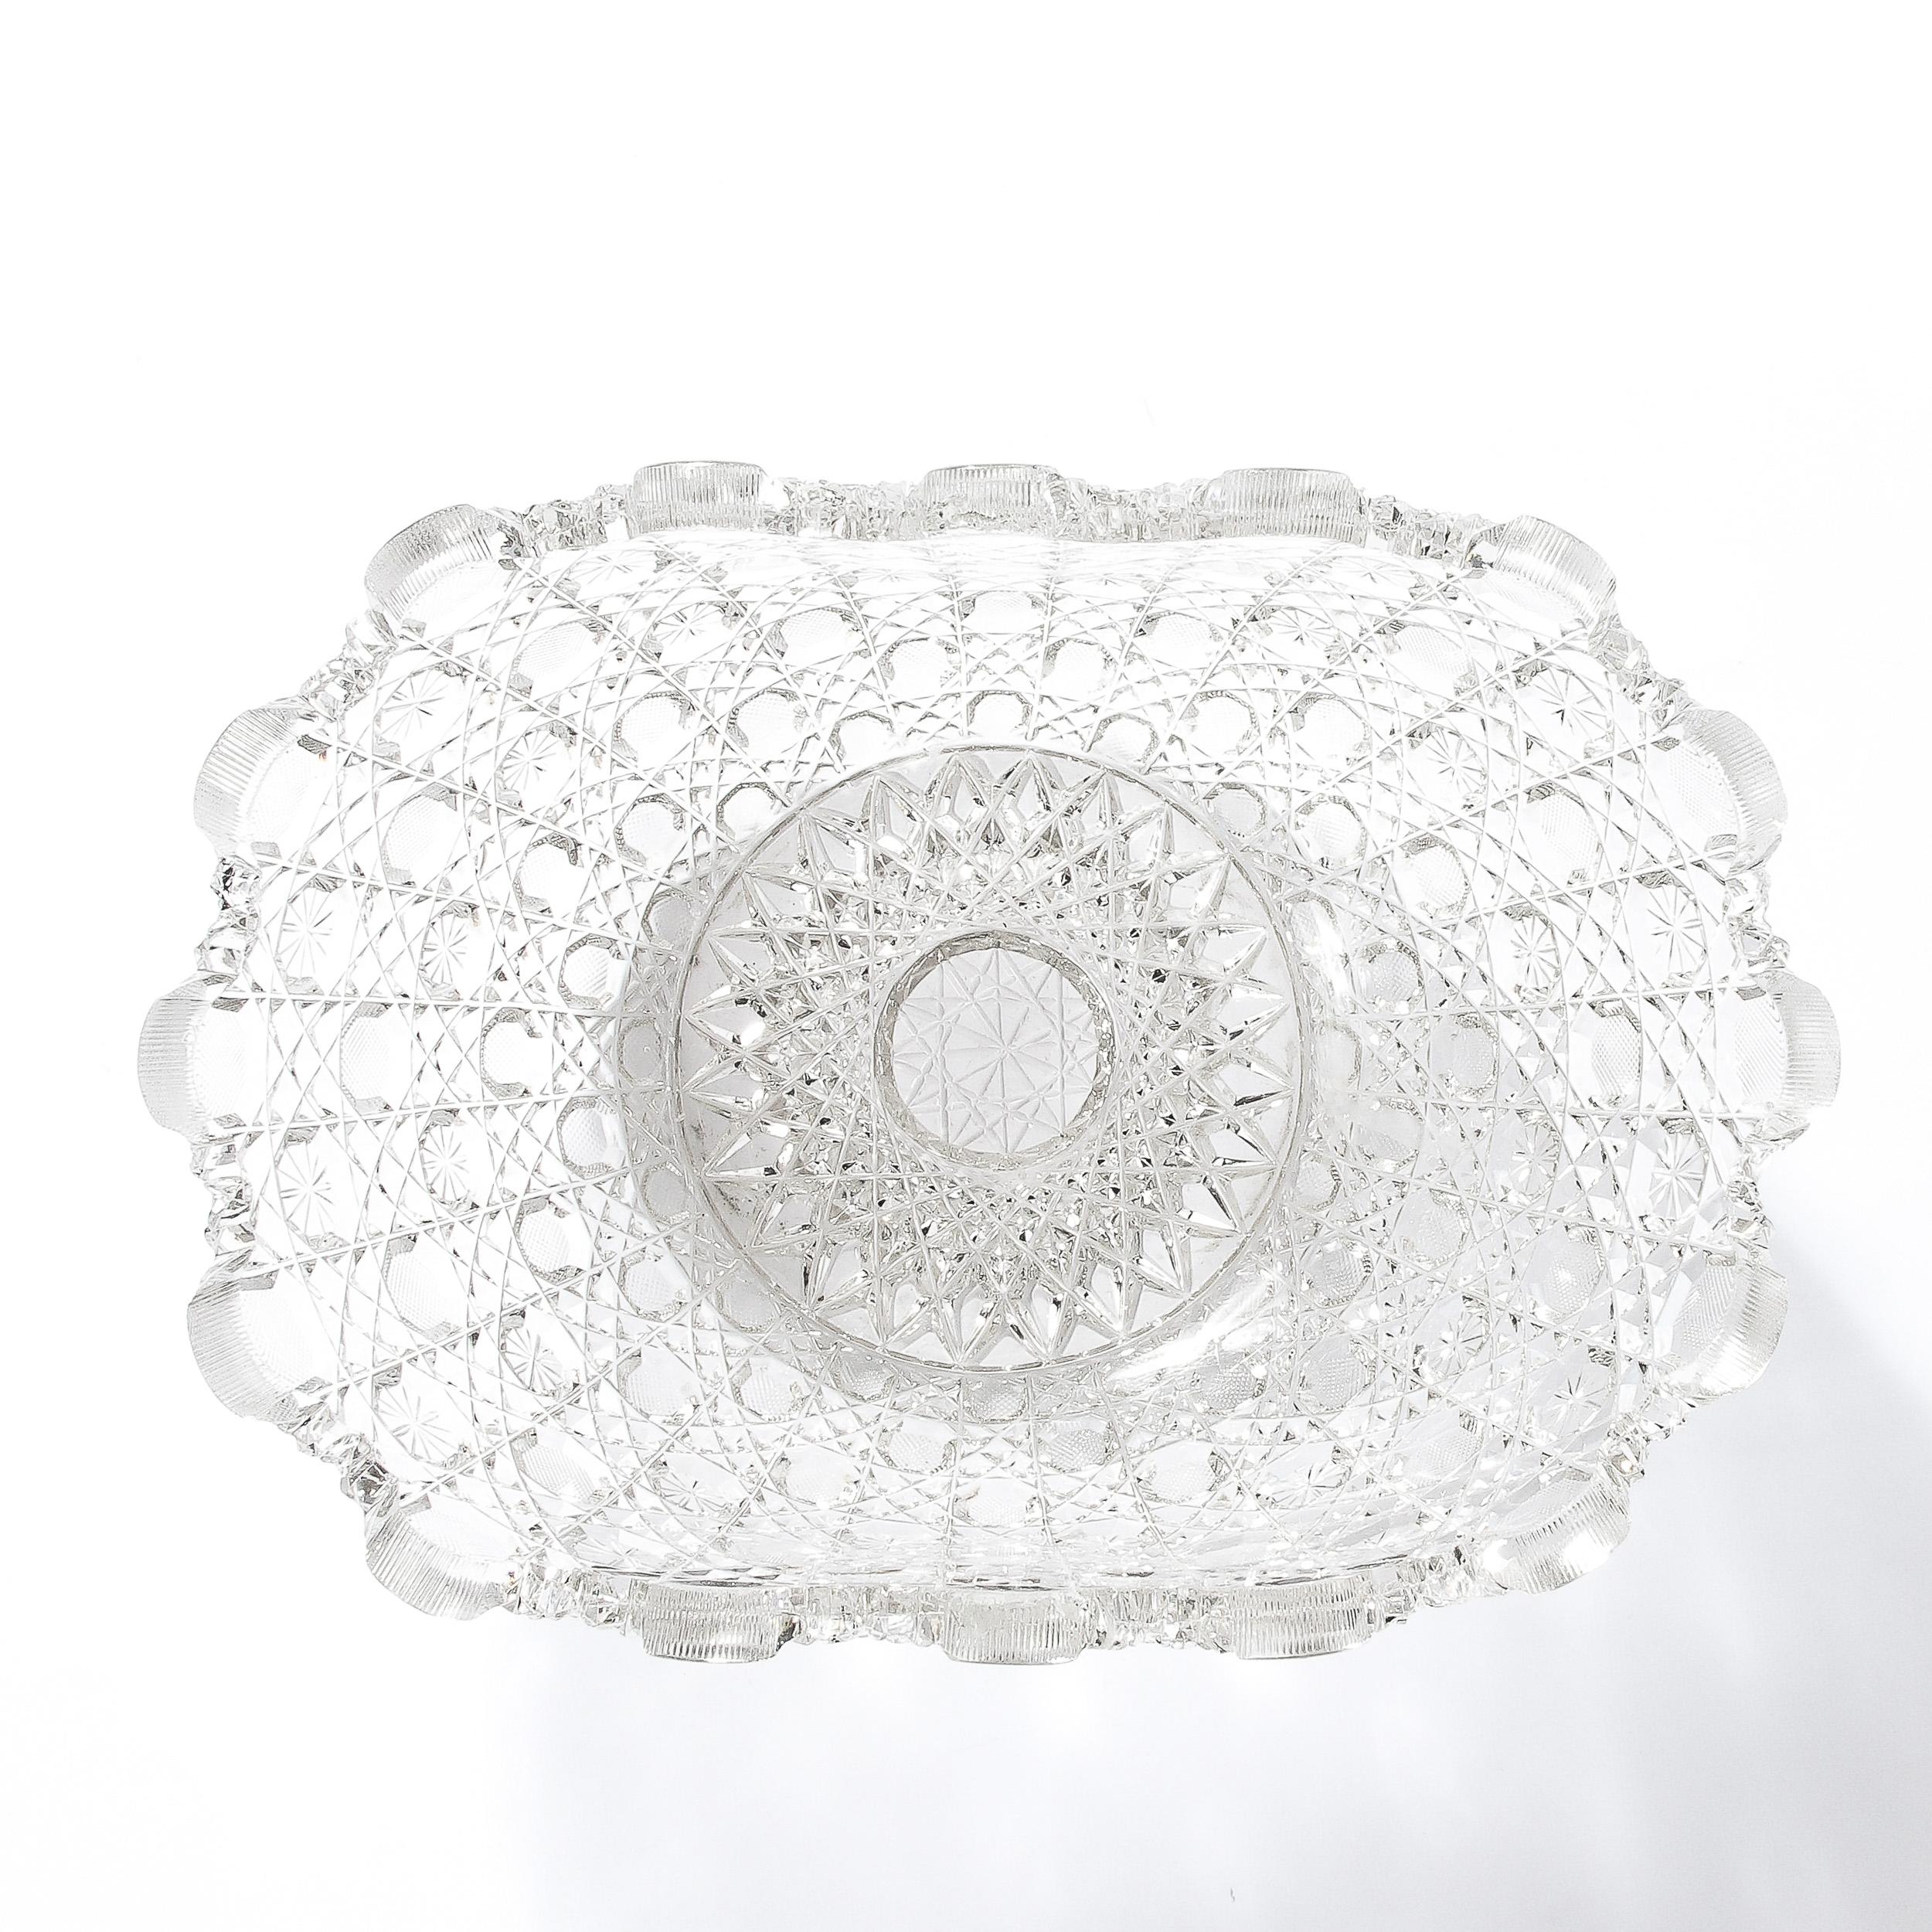 This refined Art Deco glass bowl was realized in the United States circa 1925. Realized in the celebrated Harvard pattern, this cut glass bowl offers an abundance of starburst patterns and geometries; as well as circular and jewel-like, prismatic